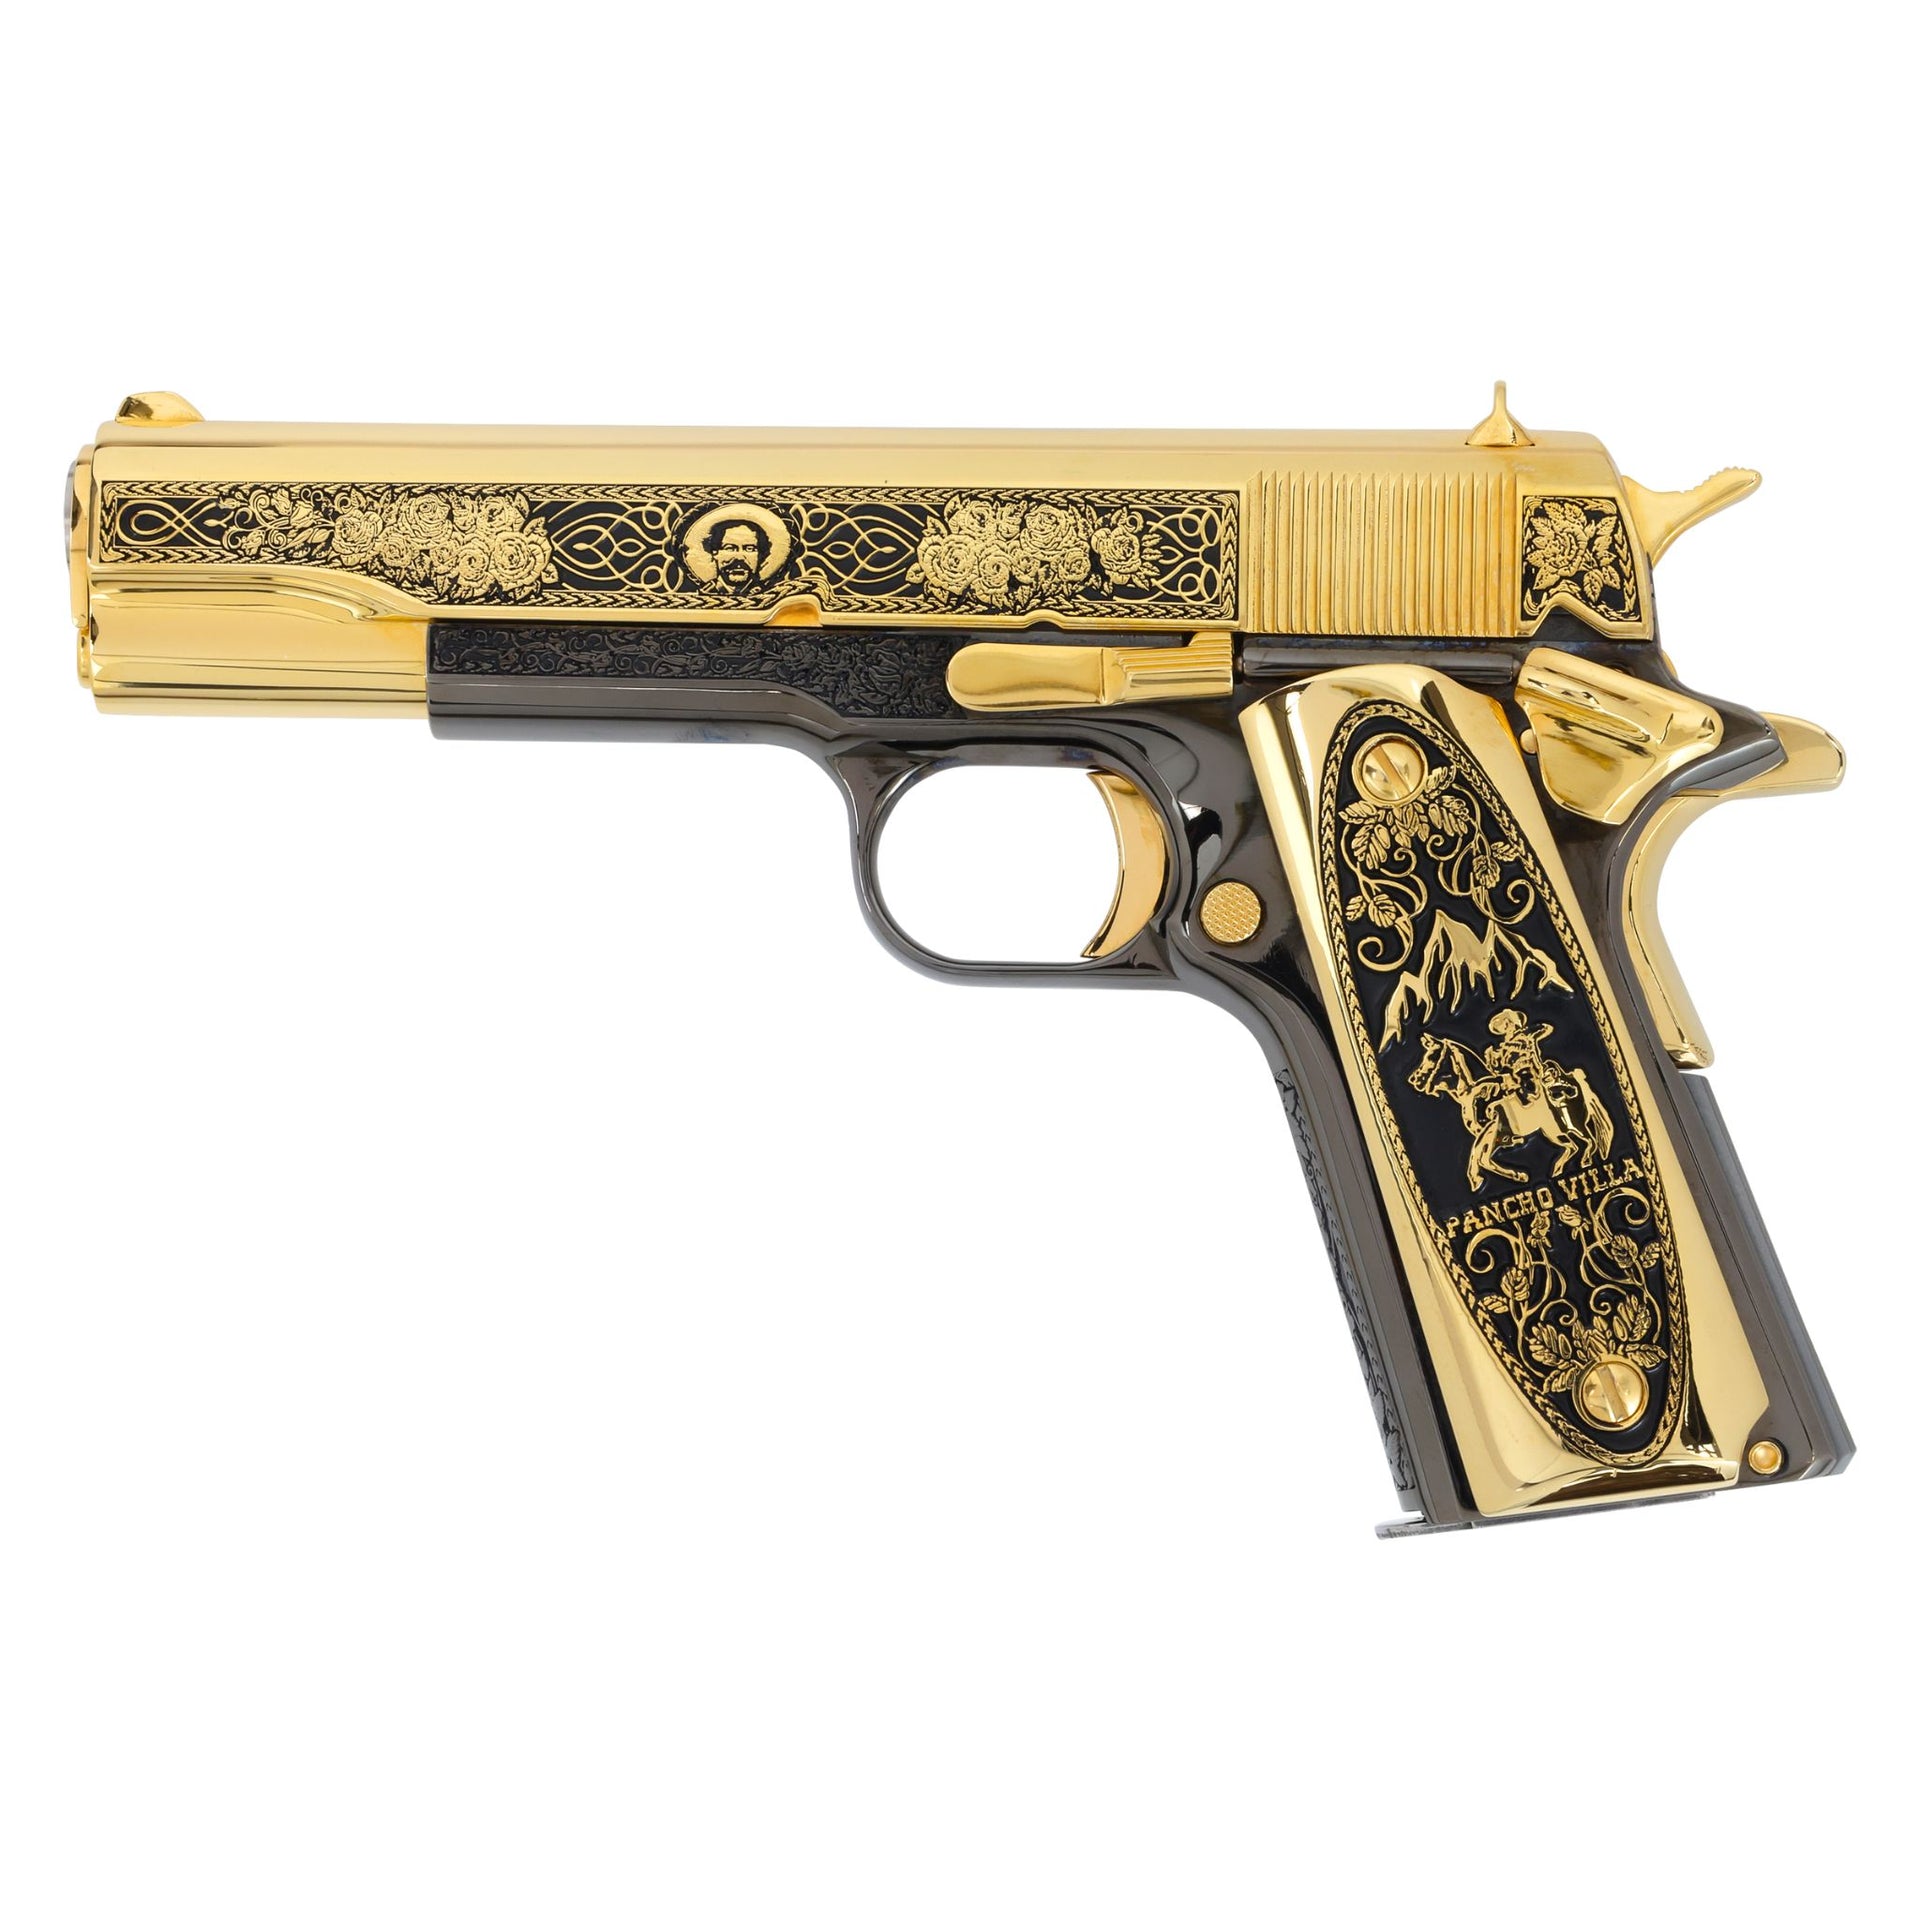 Colt 1911 Government .45 ACP Pancho Villa 24K Gold Plated and Engraved, Black Chrome Frame